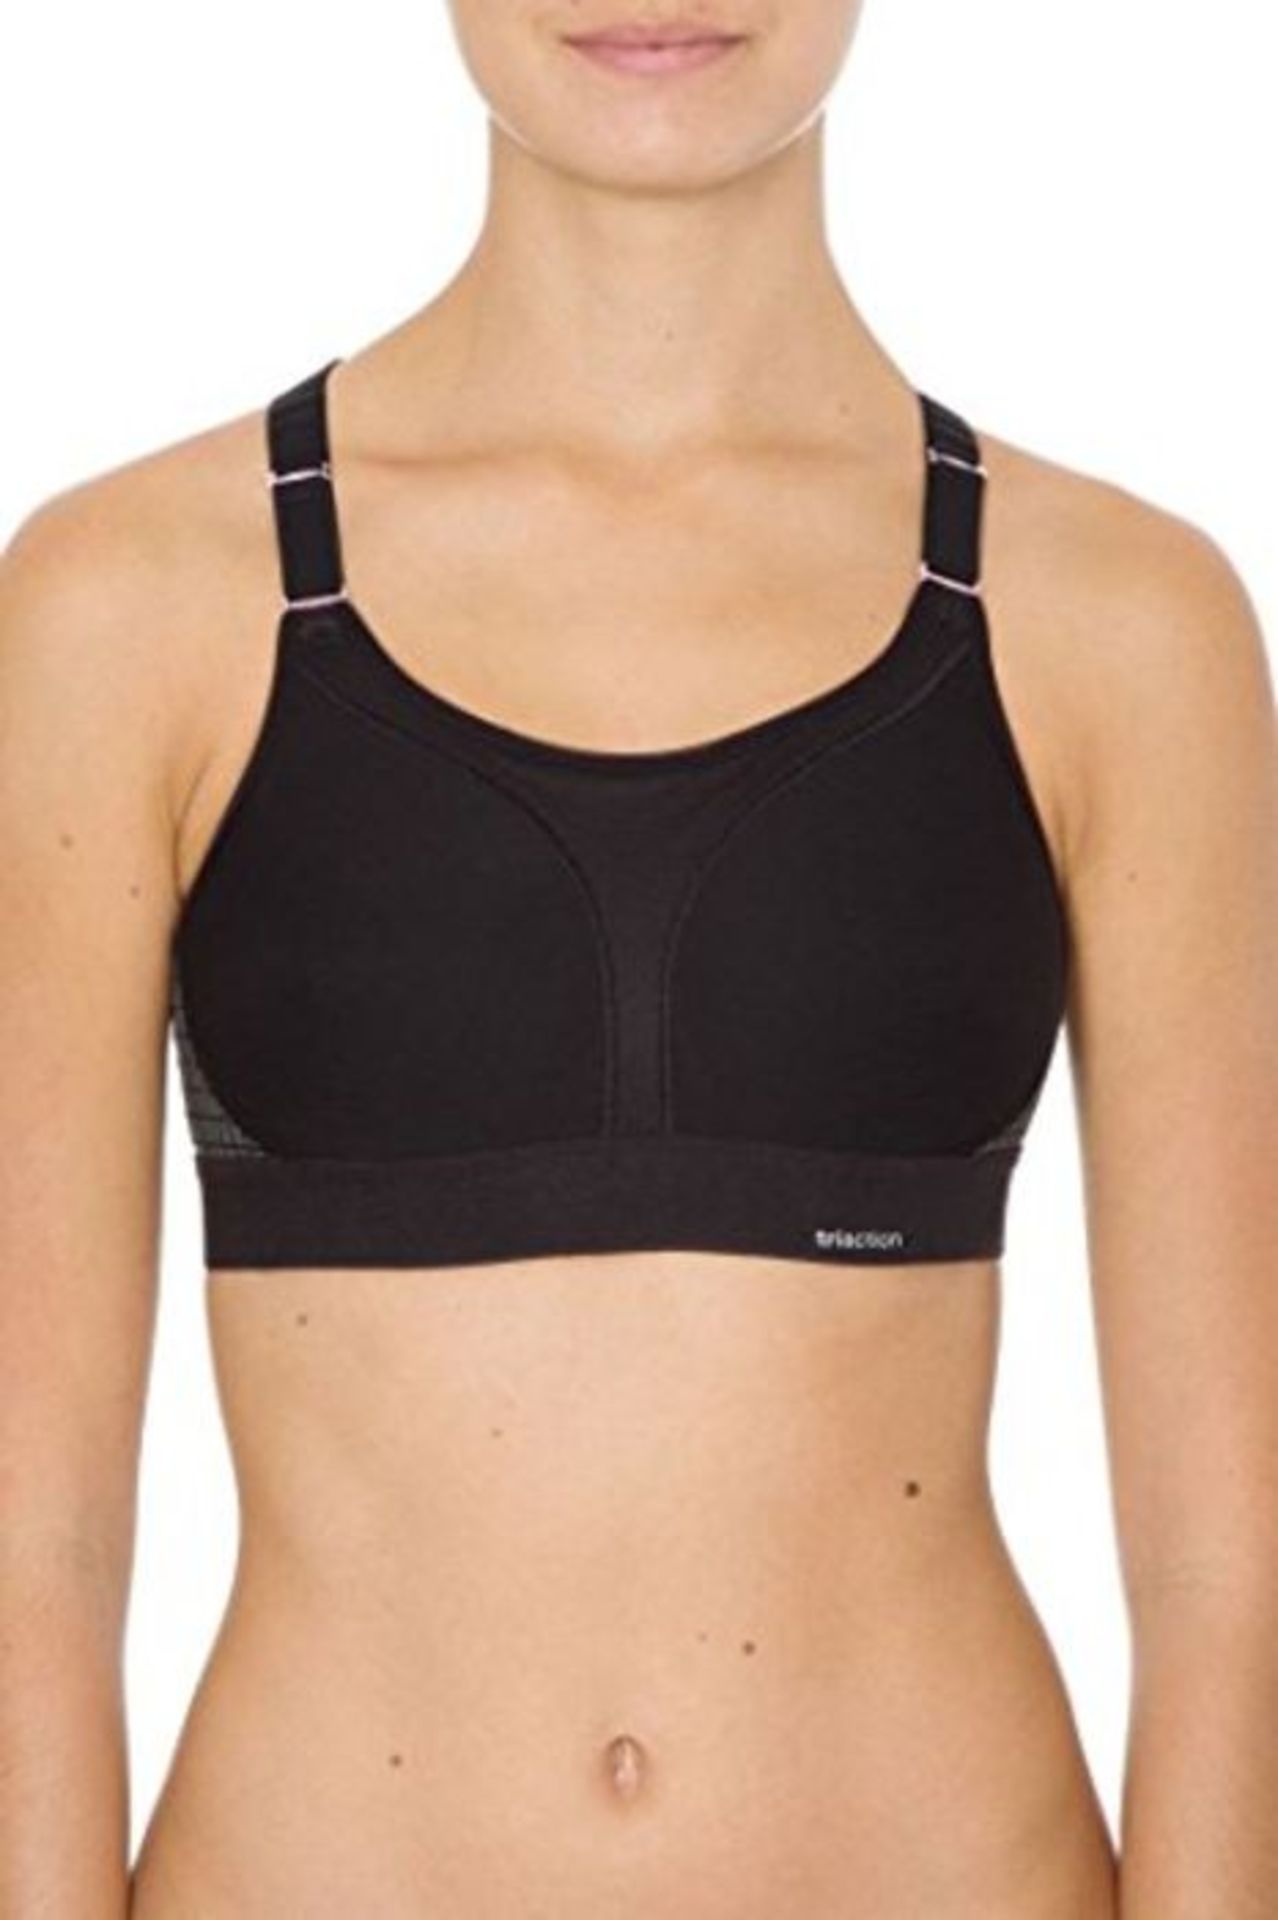 COMBINED RRP £124.00 LOT TO CONTAIN 4 ASSORTED Apparel: Sans, wonderbra, Triumph, Triumph, - Image 5 of 5